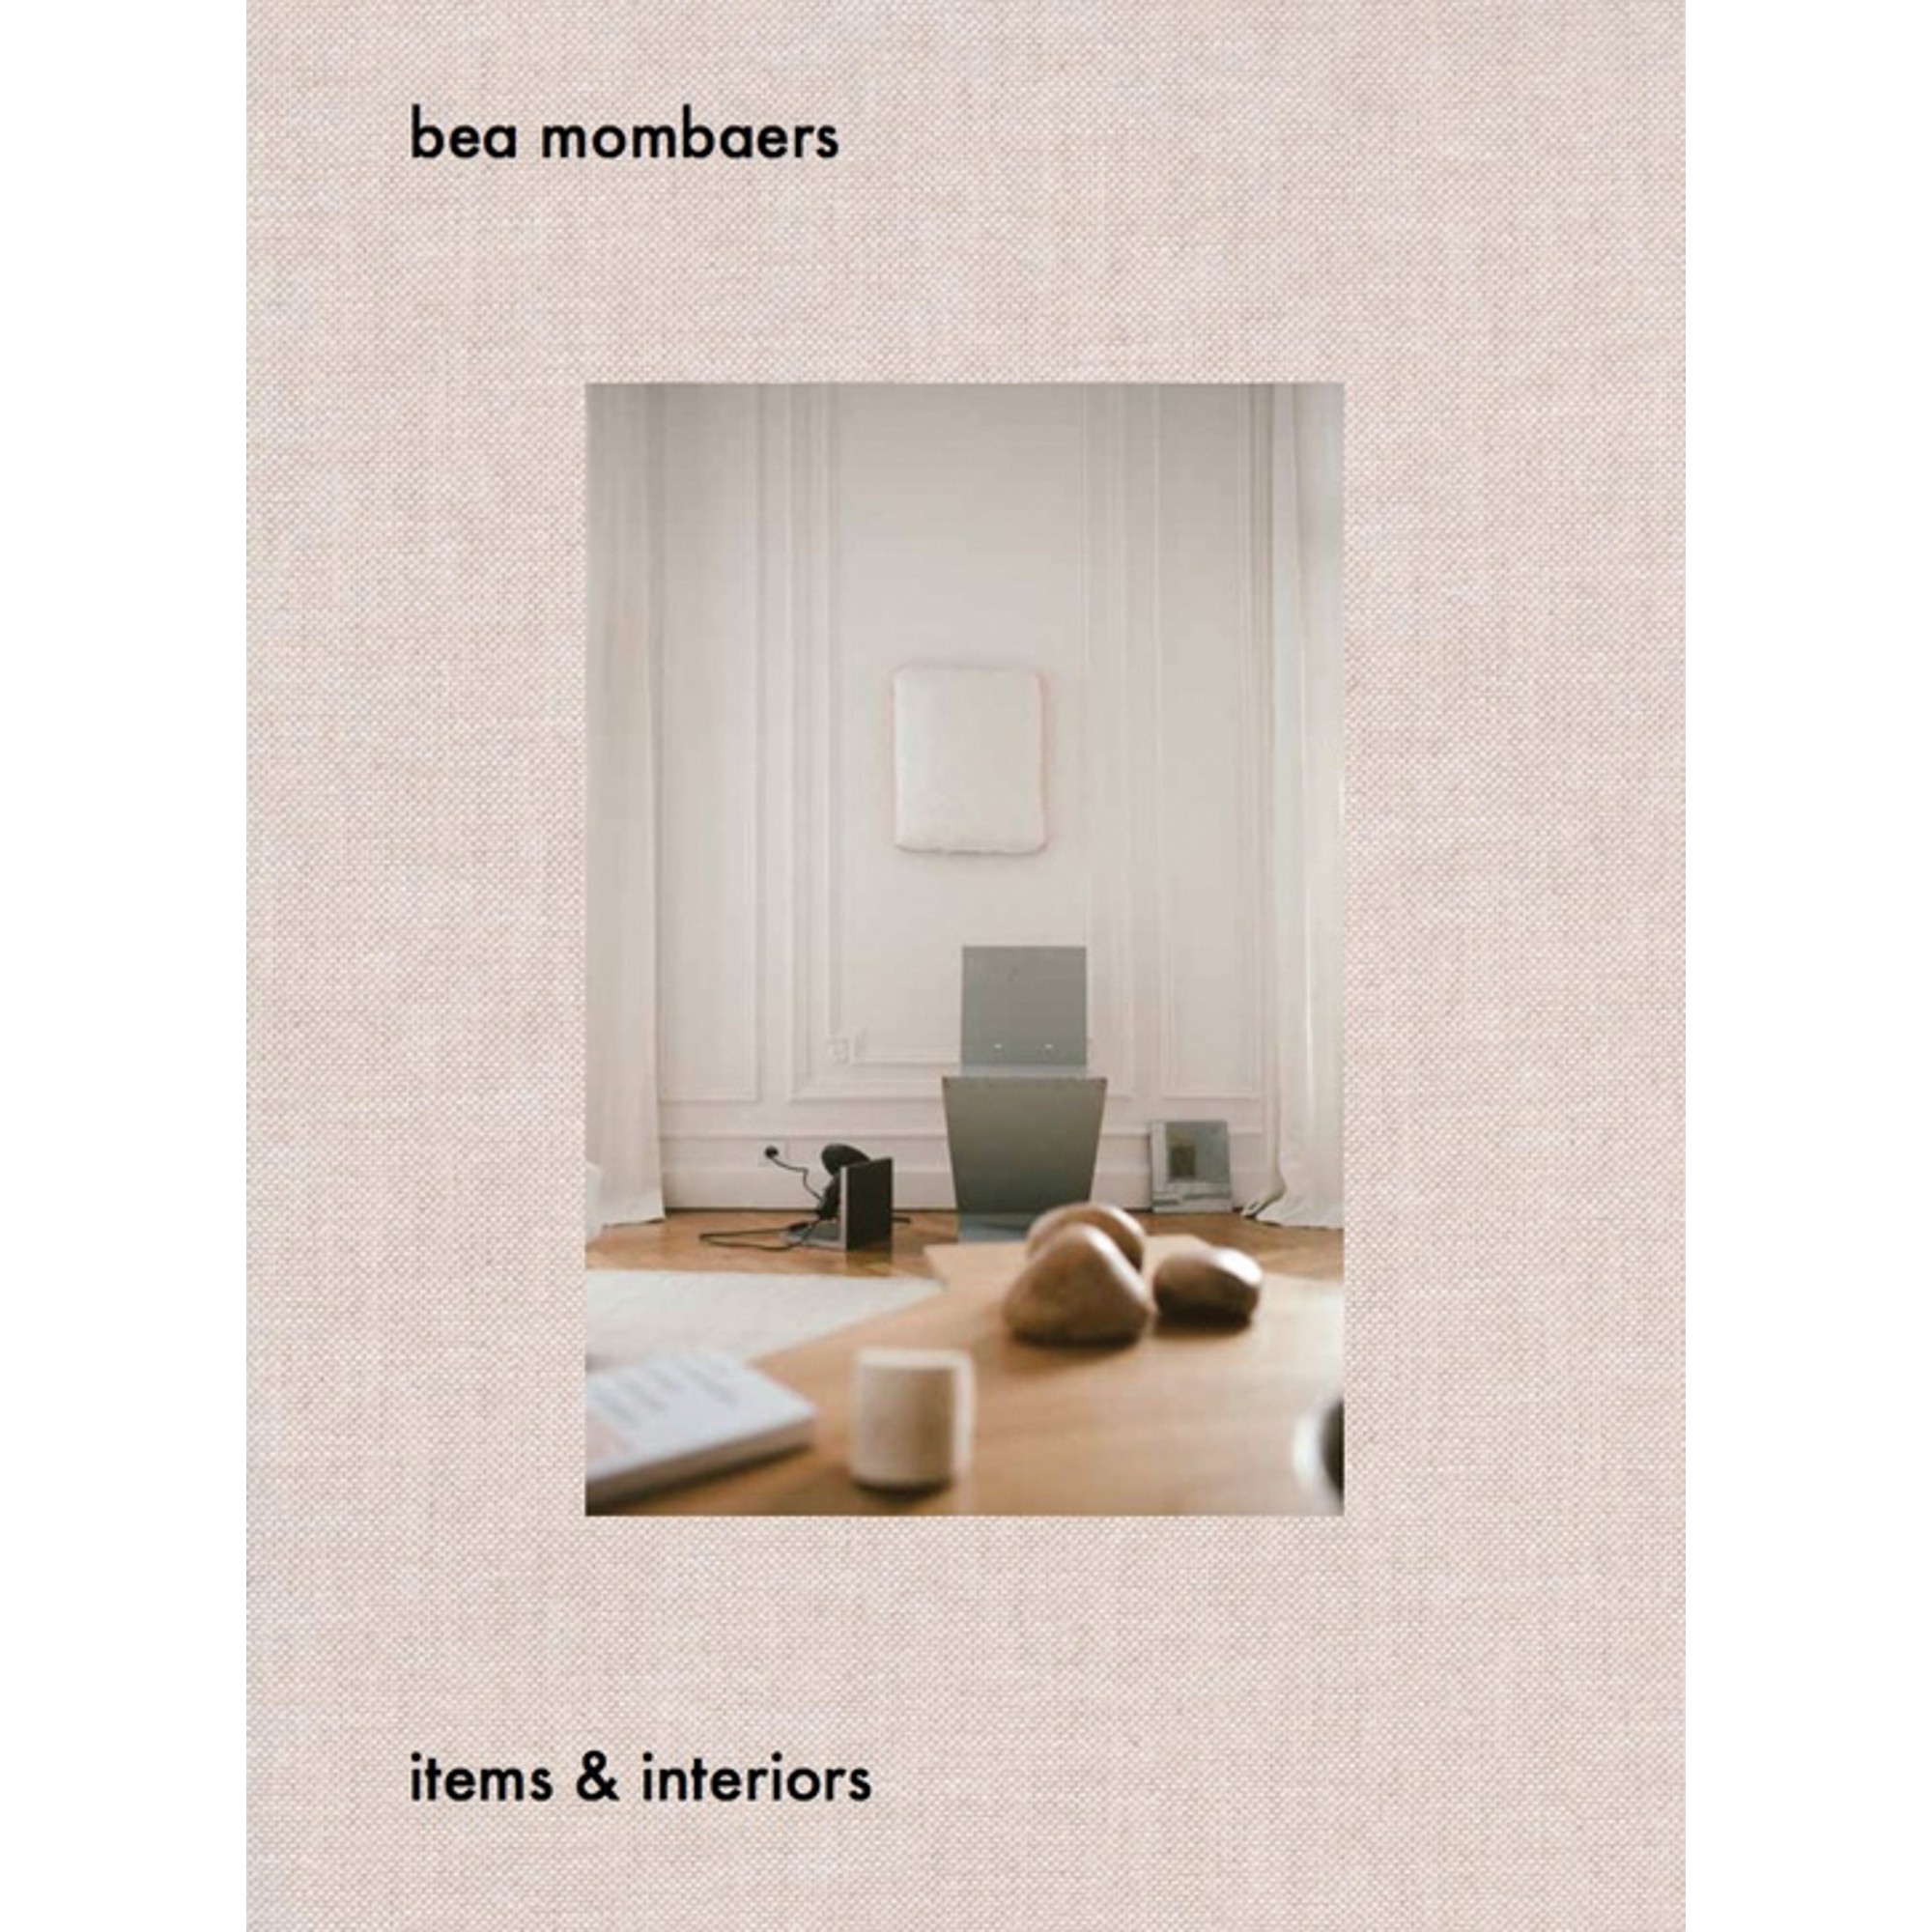 New Mags Bea Mombaers Items & Interiors